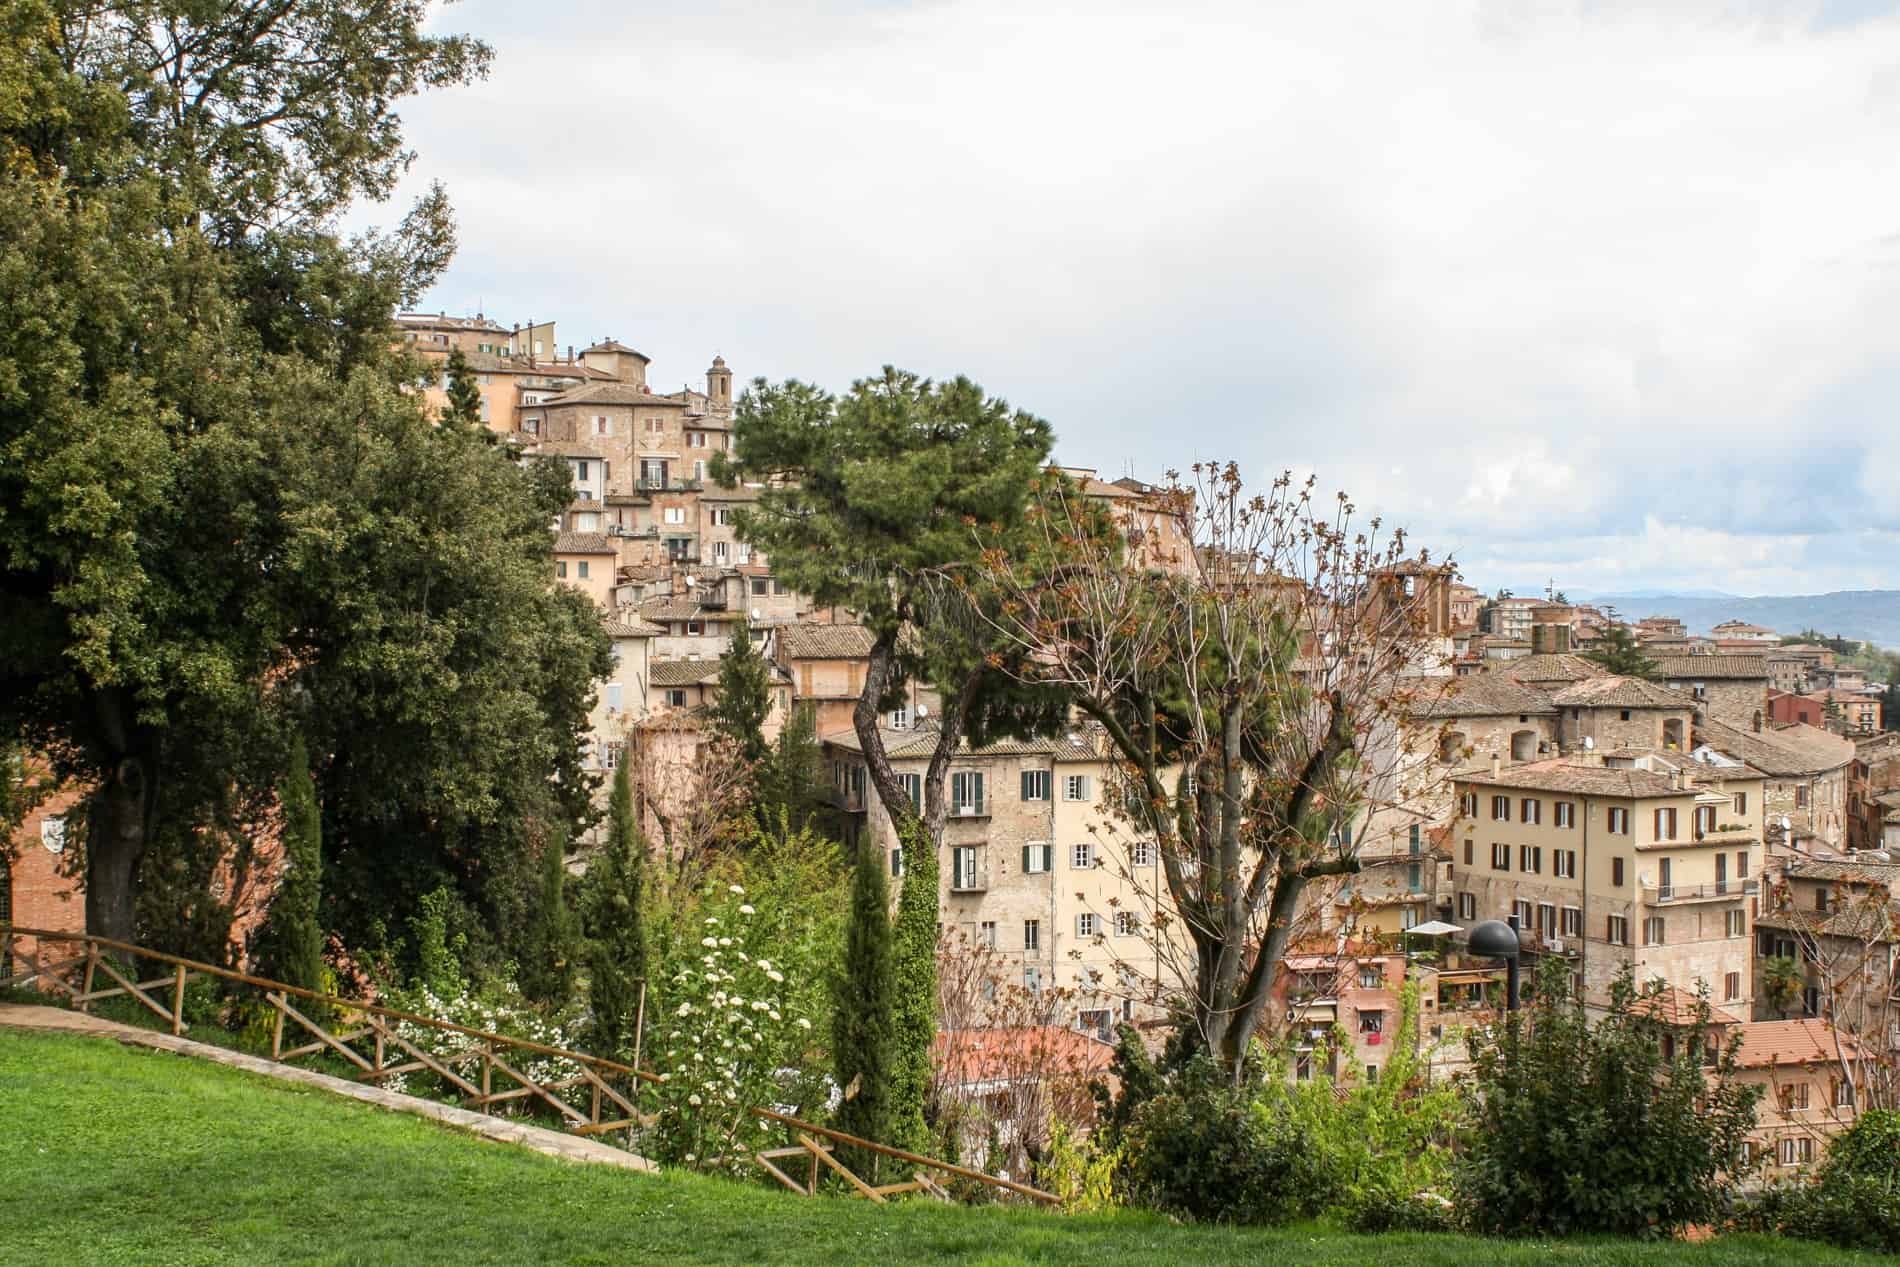 View from a green slope overlooking the stone old town of Perugia set on a hill. 